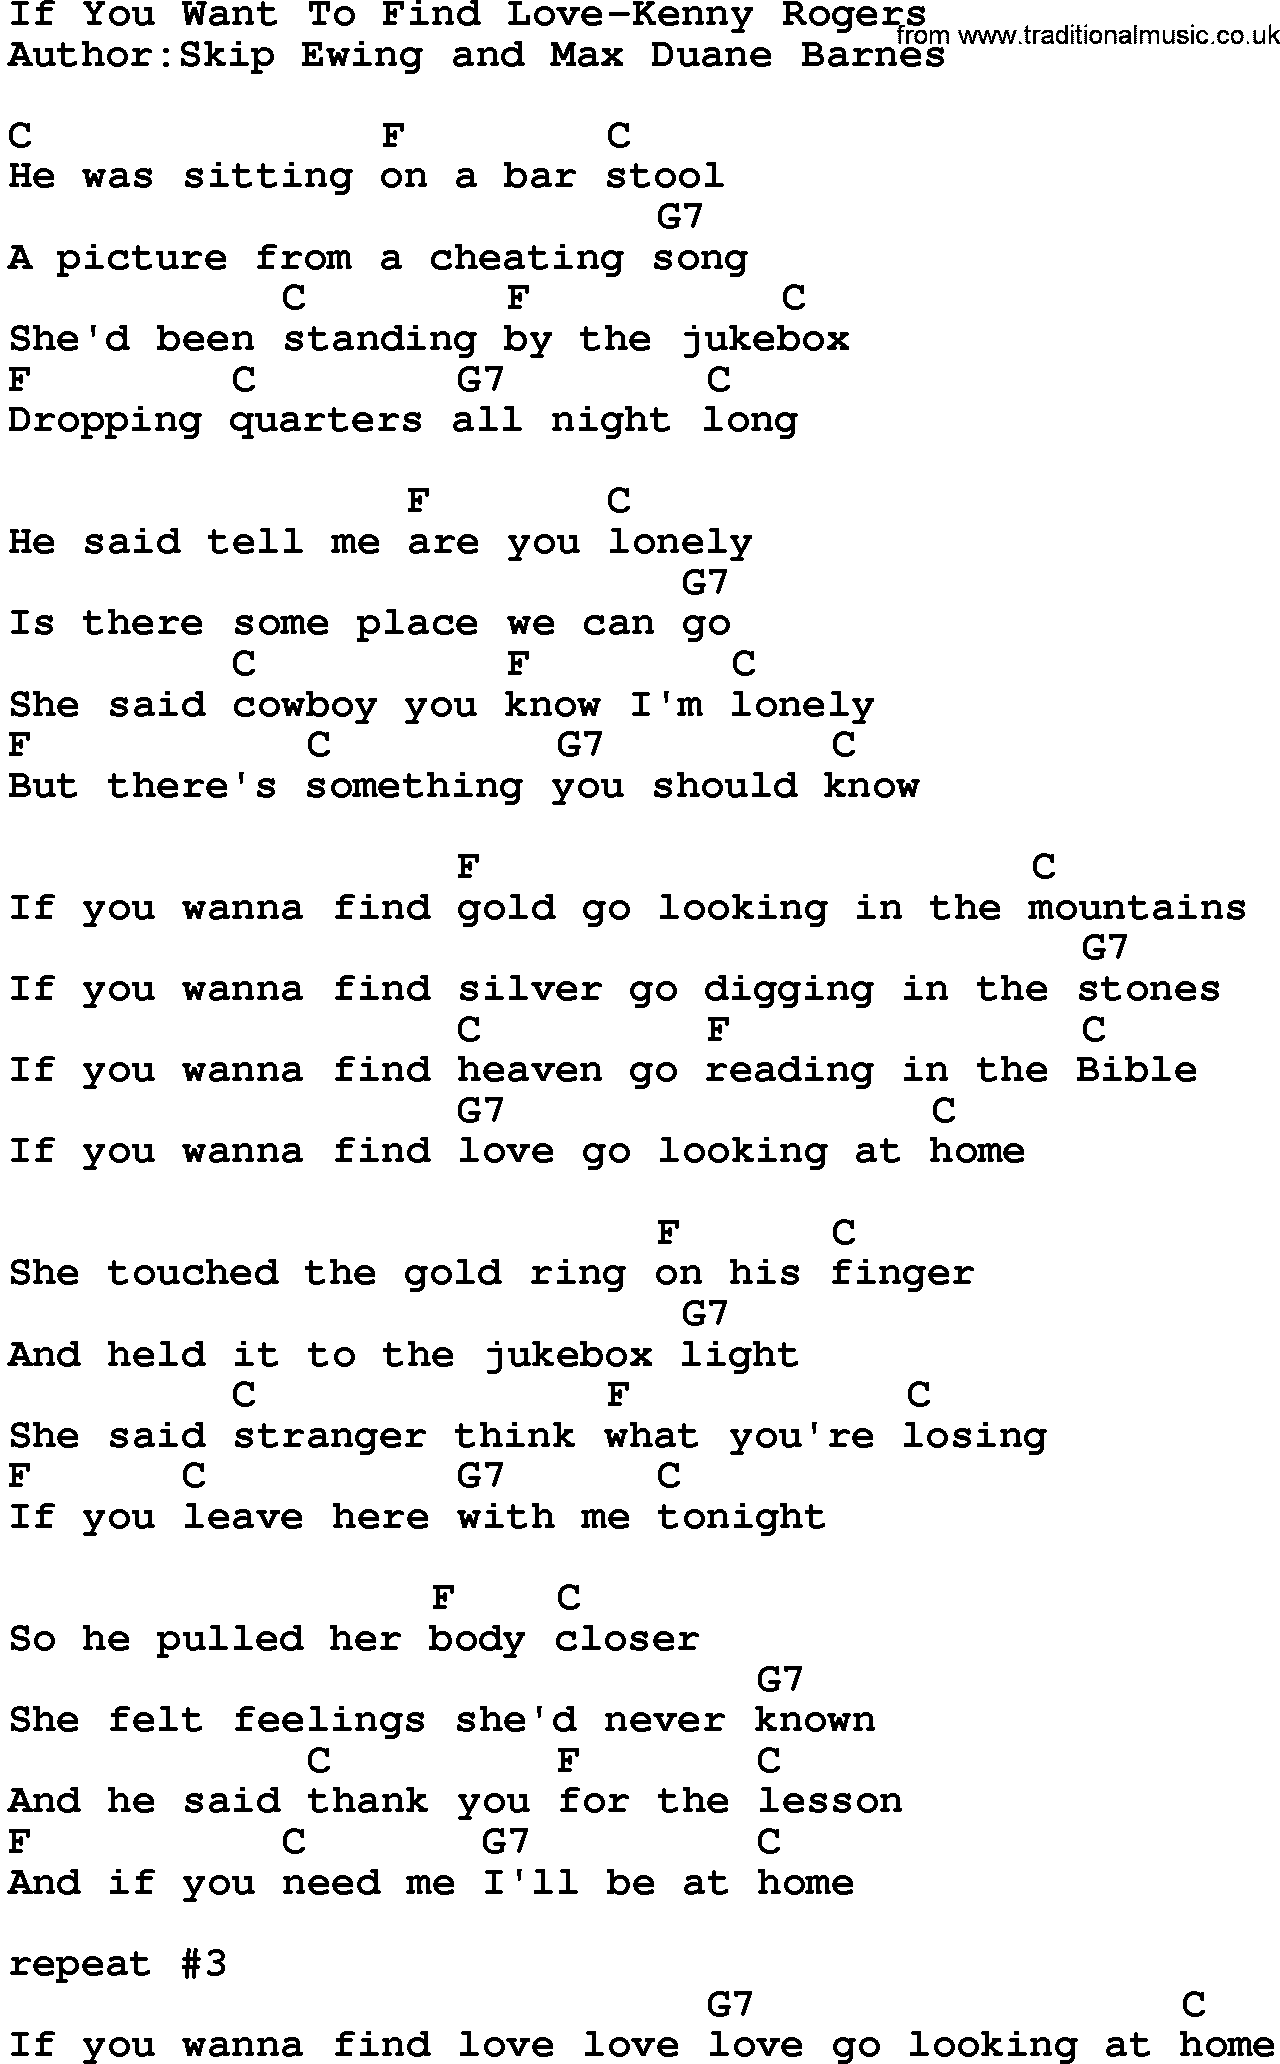 Country music song: If You Want To Find Love-Kenny Rogers lyrics and chords